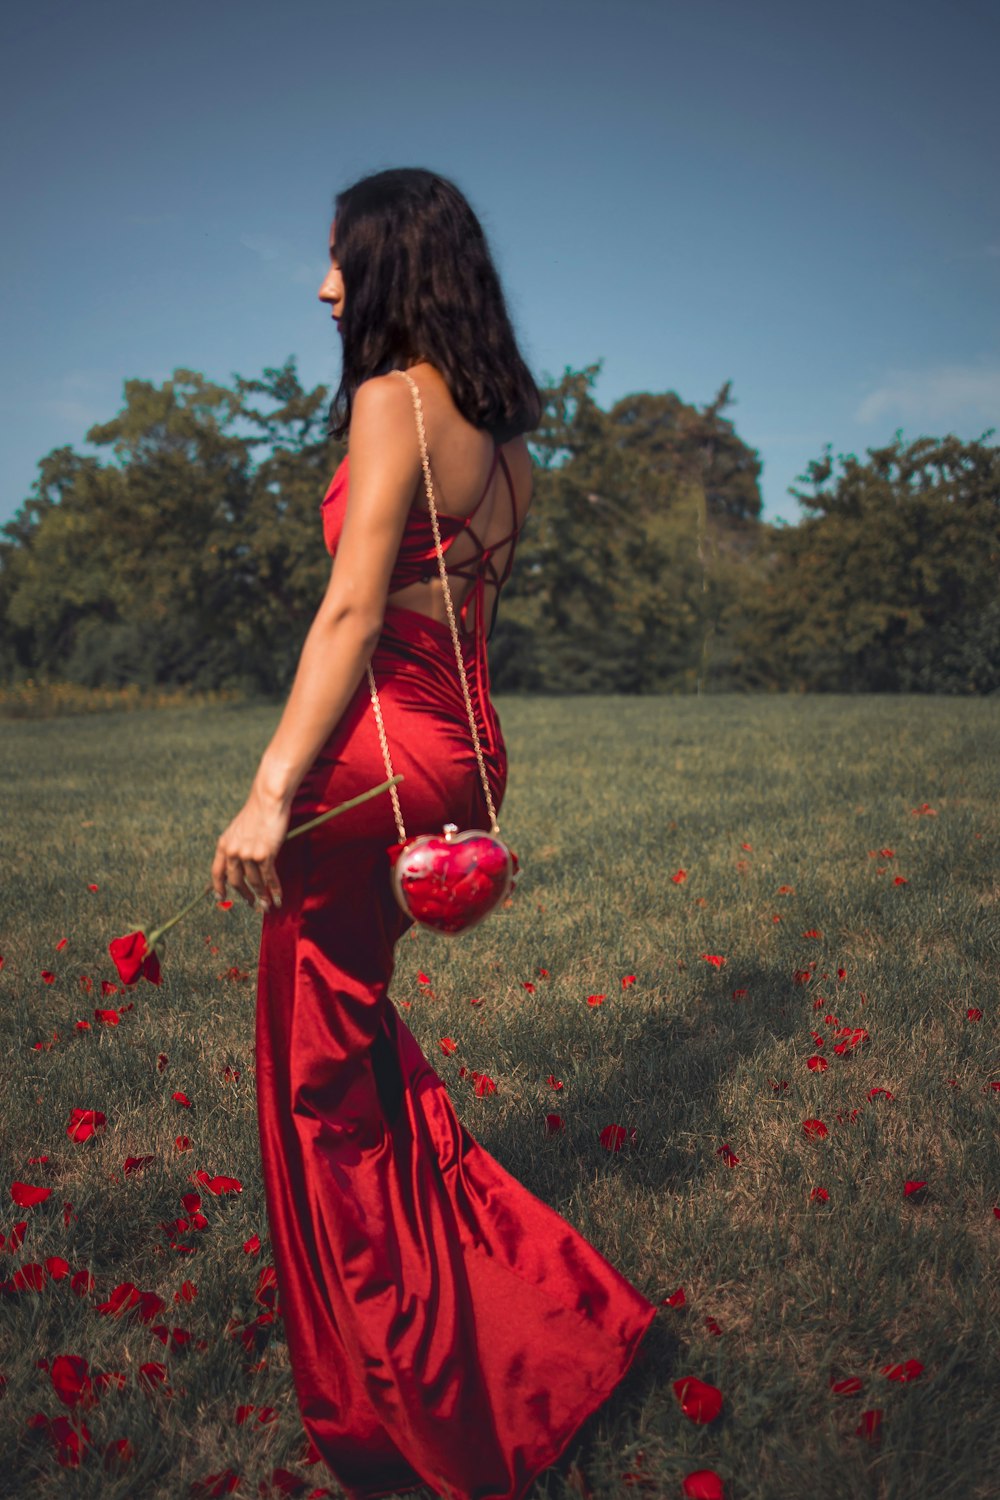 a person in a red dress holding a red ball in a field of flowers